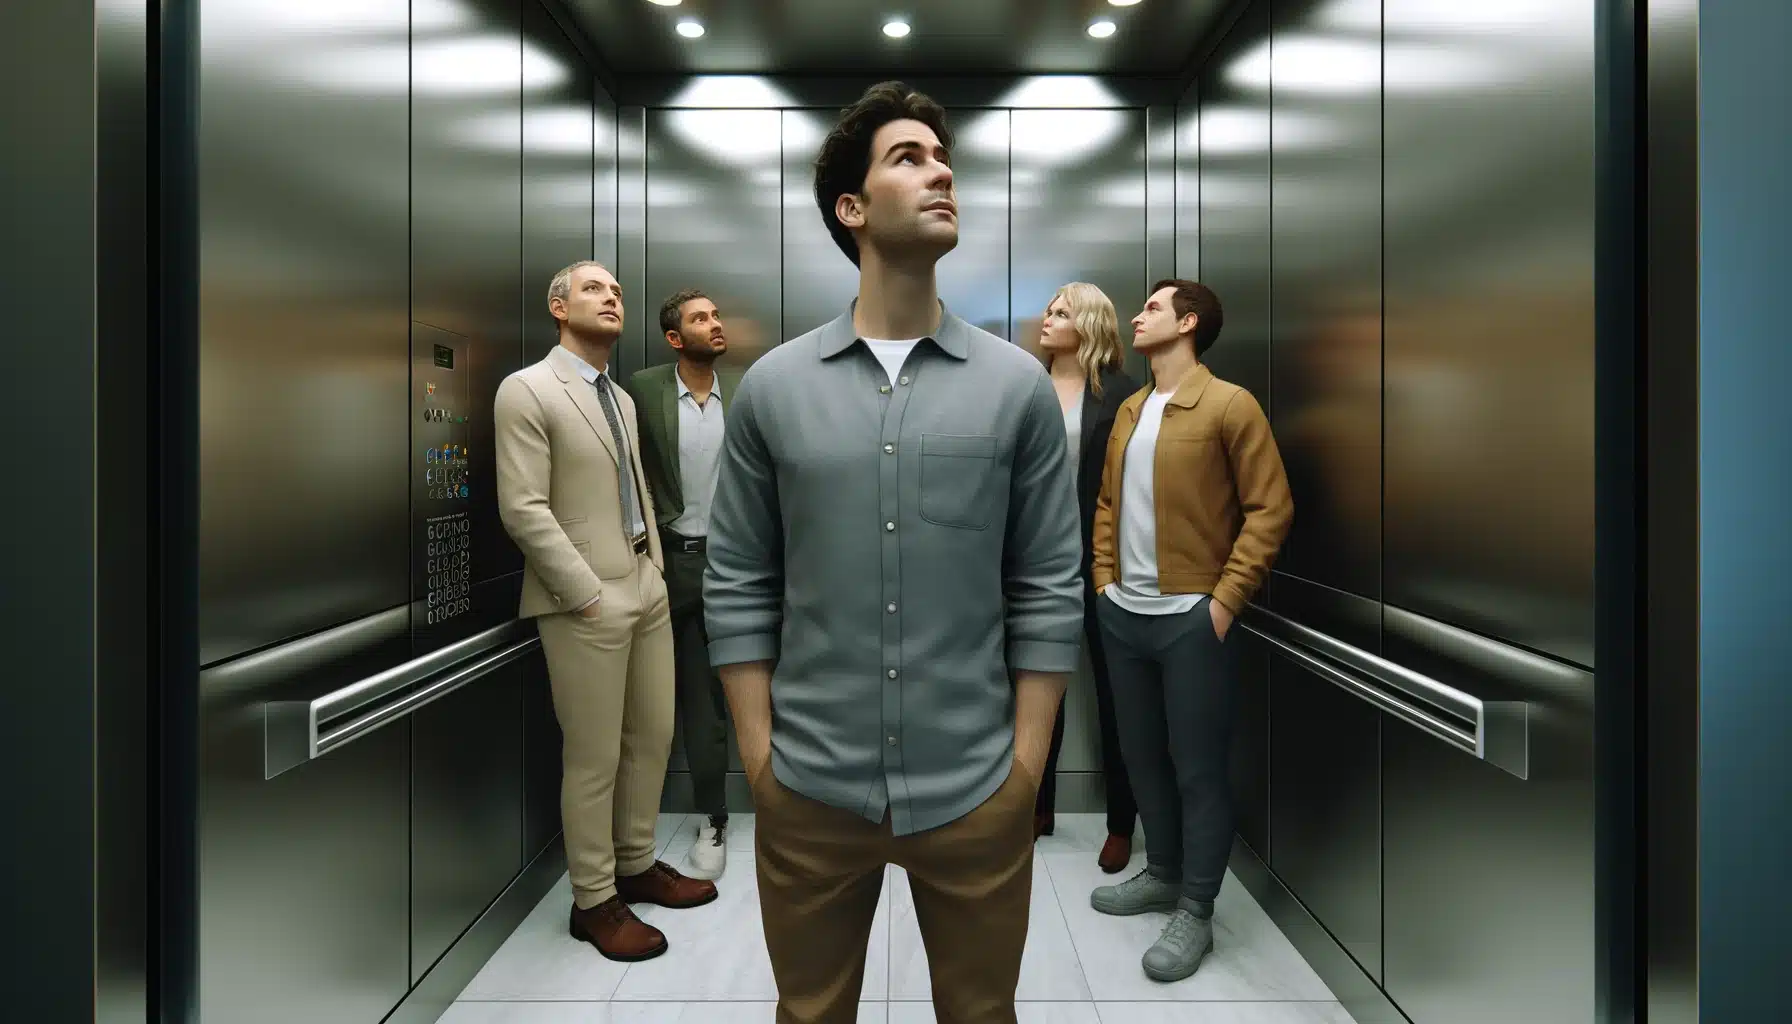 Silence on an elevator: varied reactions of individuals during an awkward silence in a confined space.